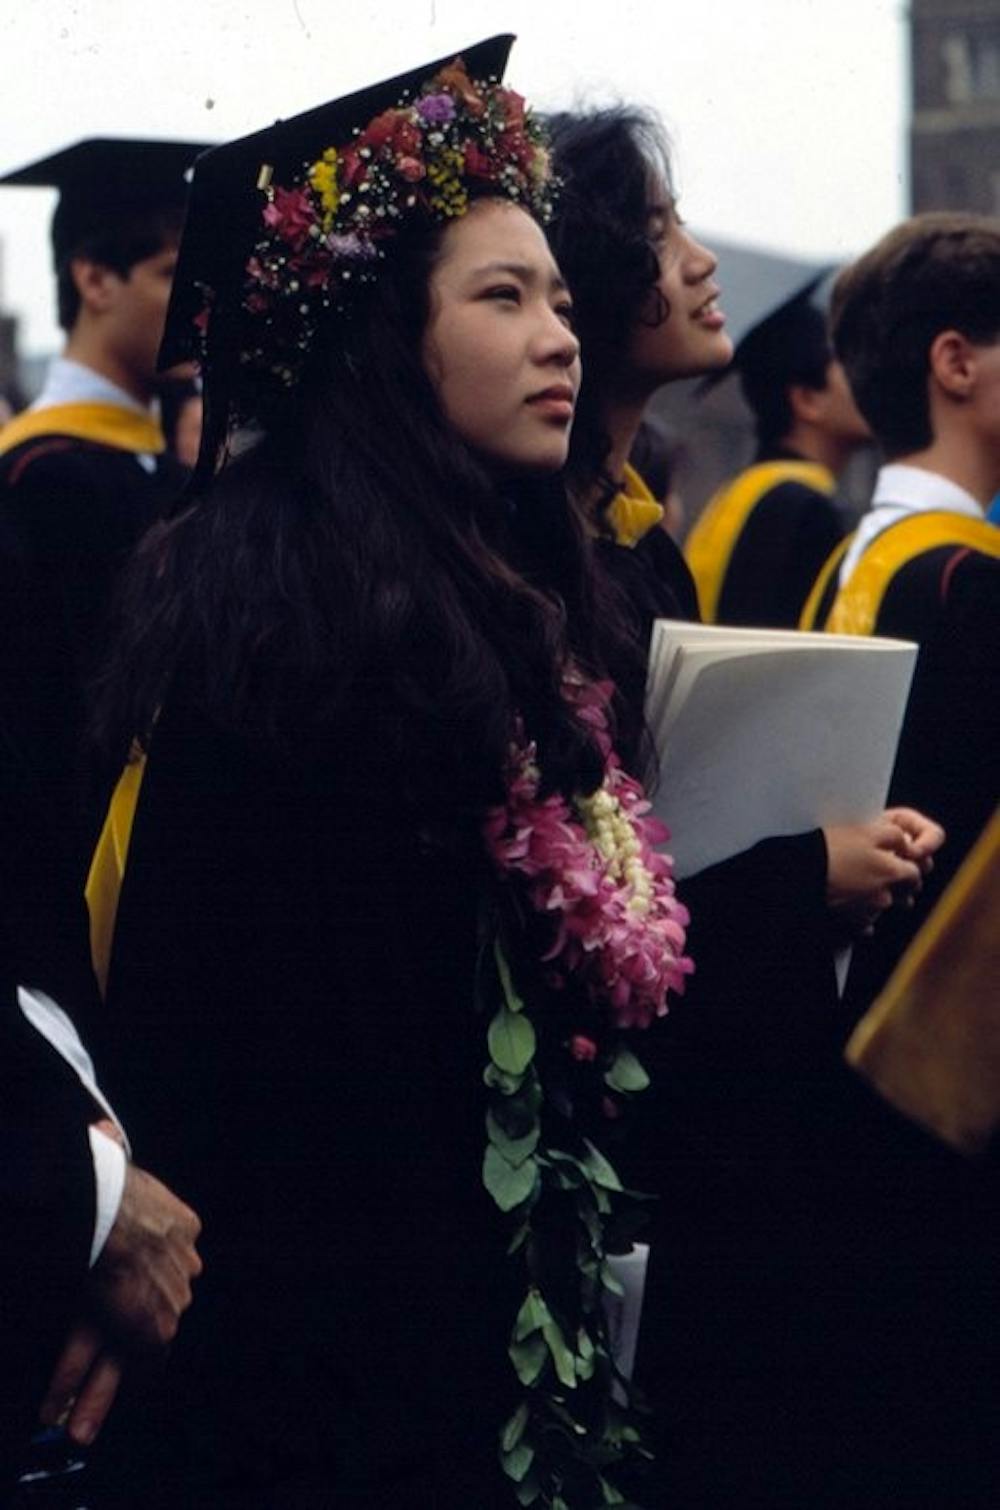 Commencement-1982-woman-graduate-in-cap-and-gown-festooned-with-flowers